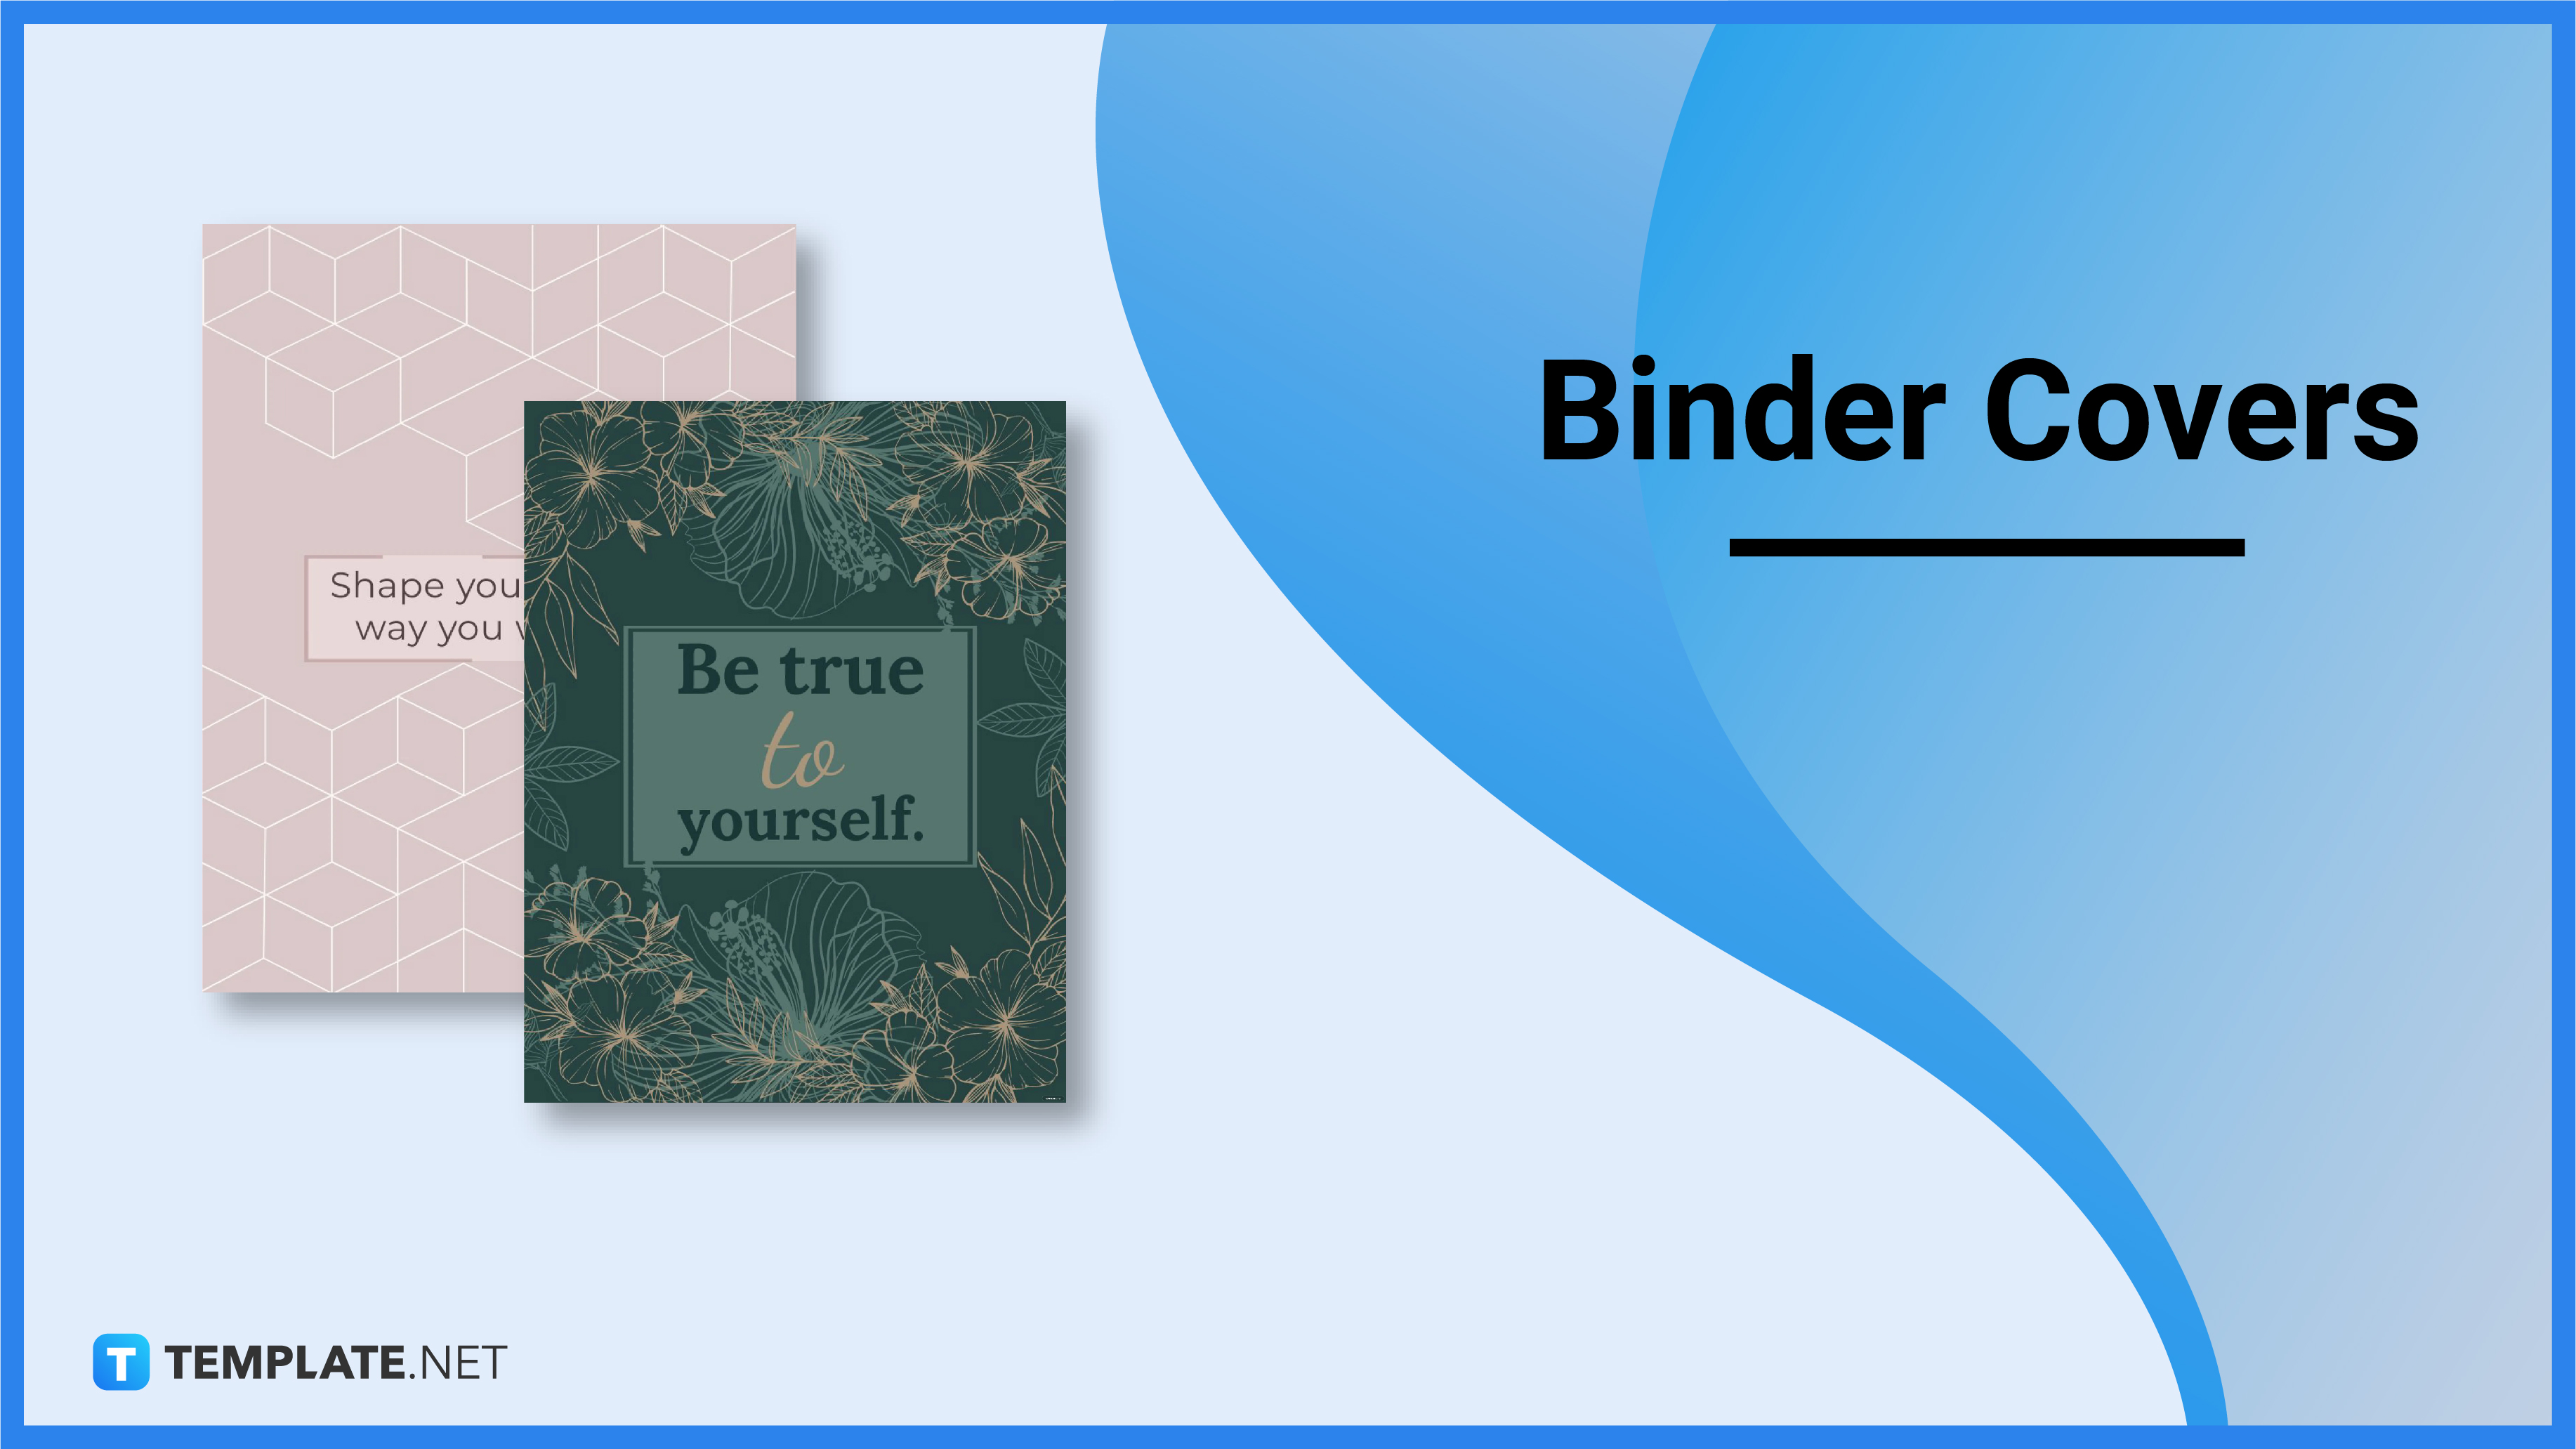 Binder Cover What Is A Binder Cover Definition Types Uses